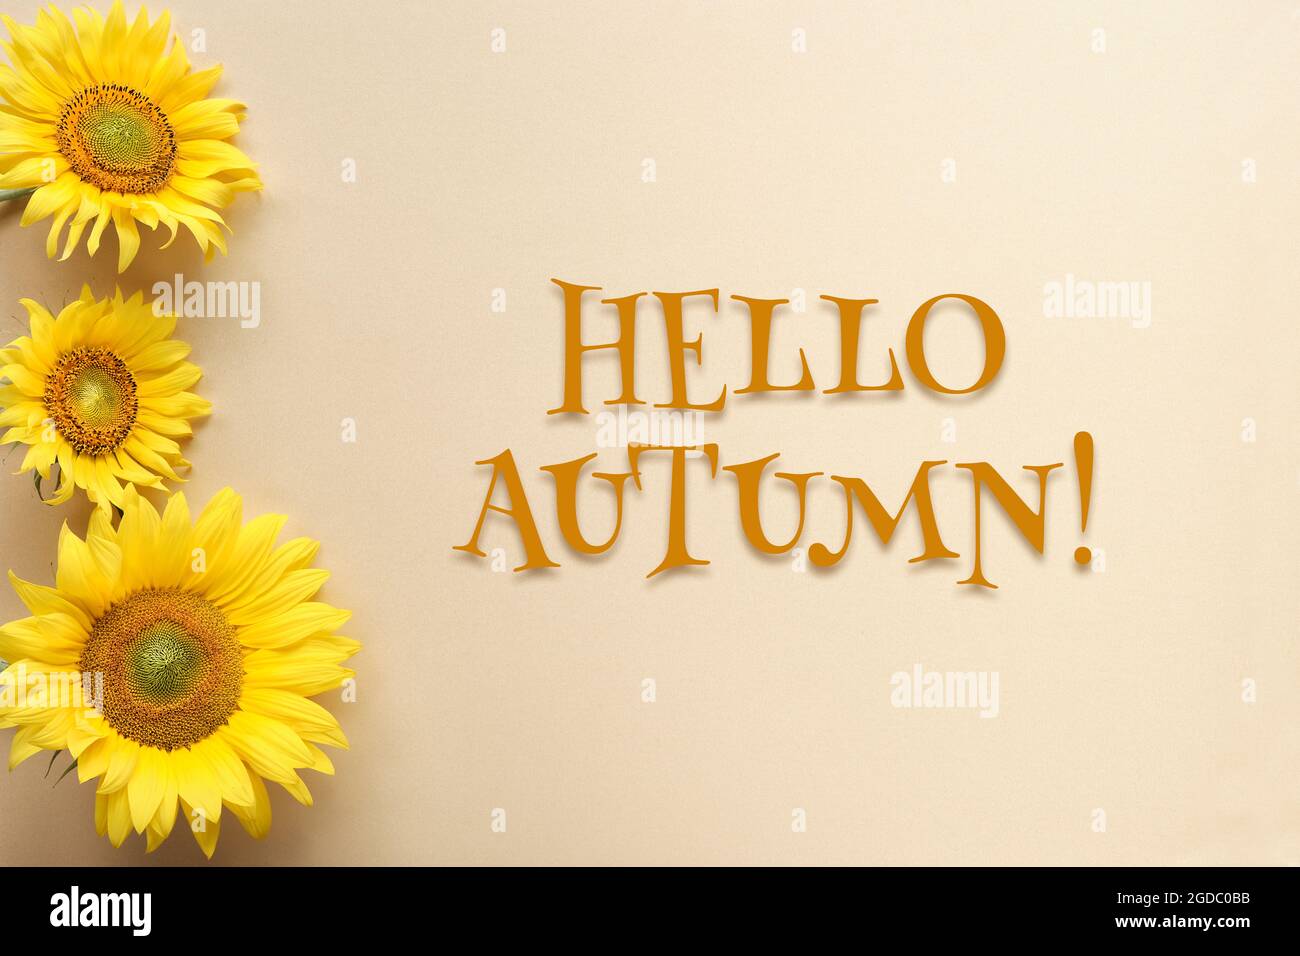 Hello Autumn, text with sunflowers on square flat lay. Beige, yellow paper background. Simple motivator for positive start of Autumn season. Stock Photo